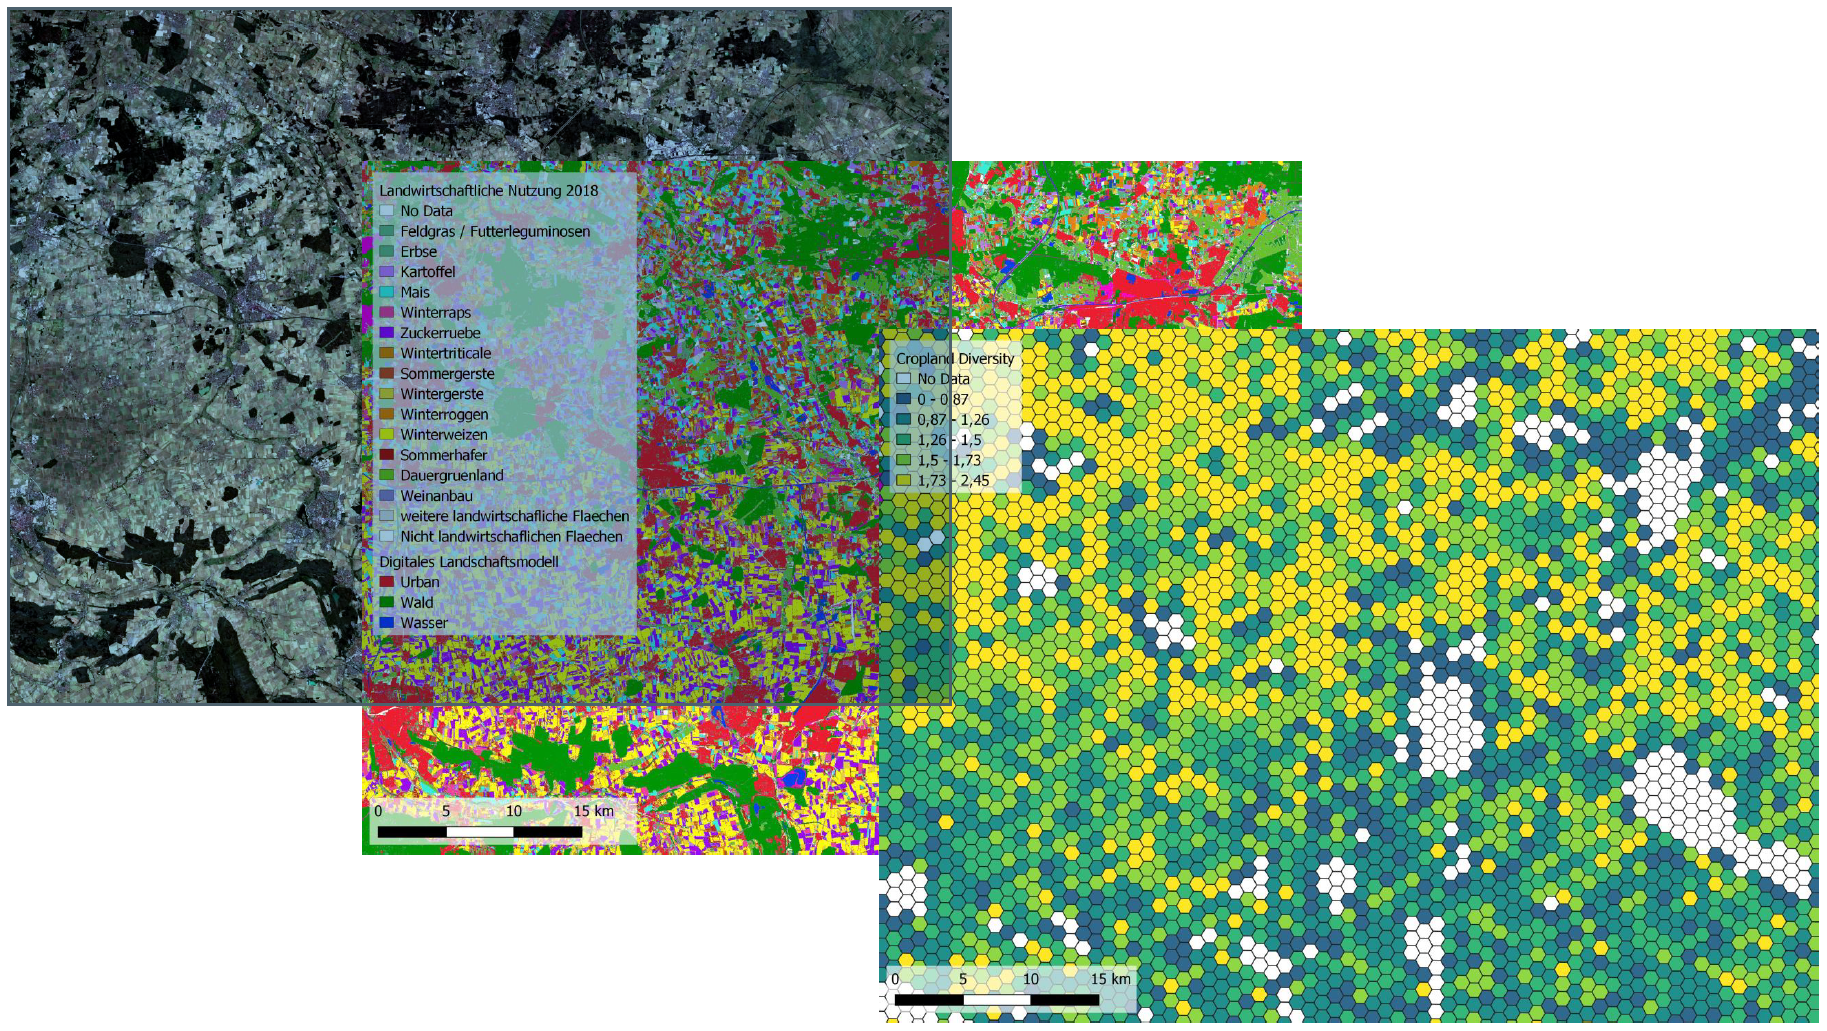 Left: Sentinel-2 satellite image of a region south of Braunschweig, Lower Saxony; center: mapping of main crop types based on Copernicus satellite data; right: exemplary representation of "crop diversity" for 1 km² hexagons.  The figure uses an example to illustrate the process from the acquisition of a satellite image to the calculation and presentation of a (partial) indicator of habitat diversity. Crop diversity is a measure of how many different crop species occur in which distribution within a landscape section (here: hexagons). The higher the value, the higher the cropping diversity in the hexagon cell. High crop diversity generally has a positive effect on habitat diversity and thus biodiversity in the agricultural landscape.